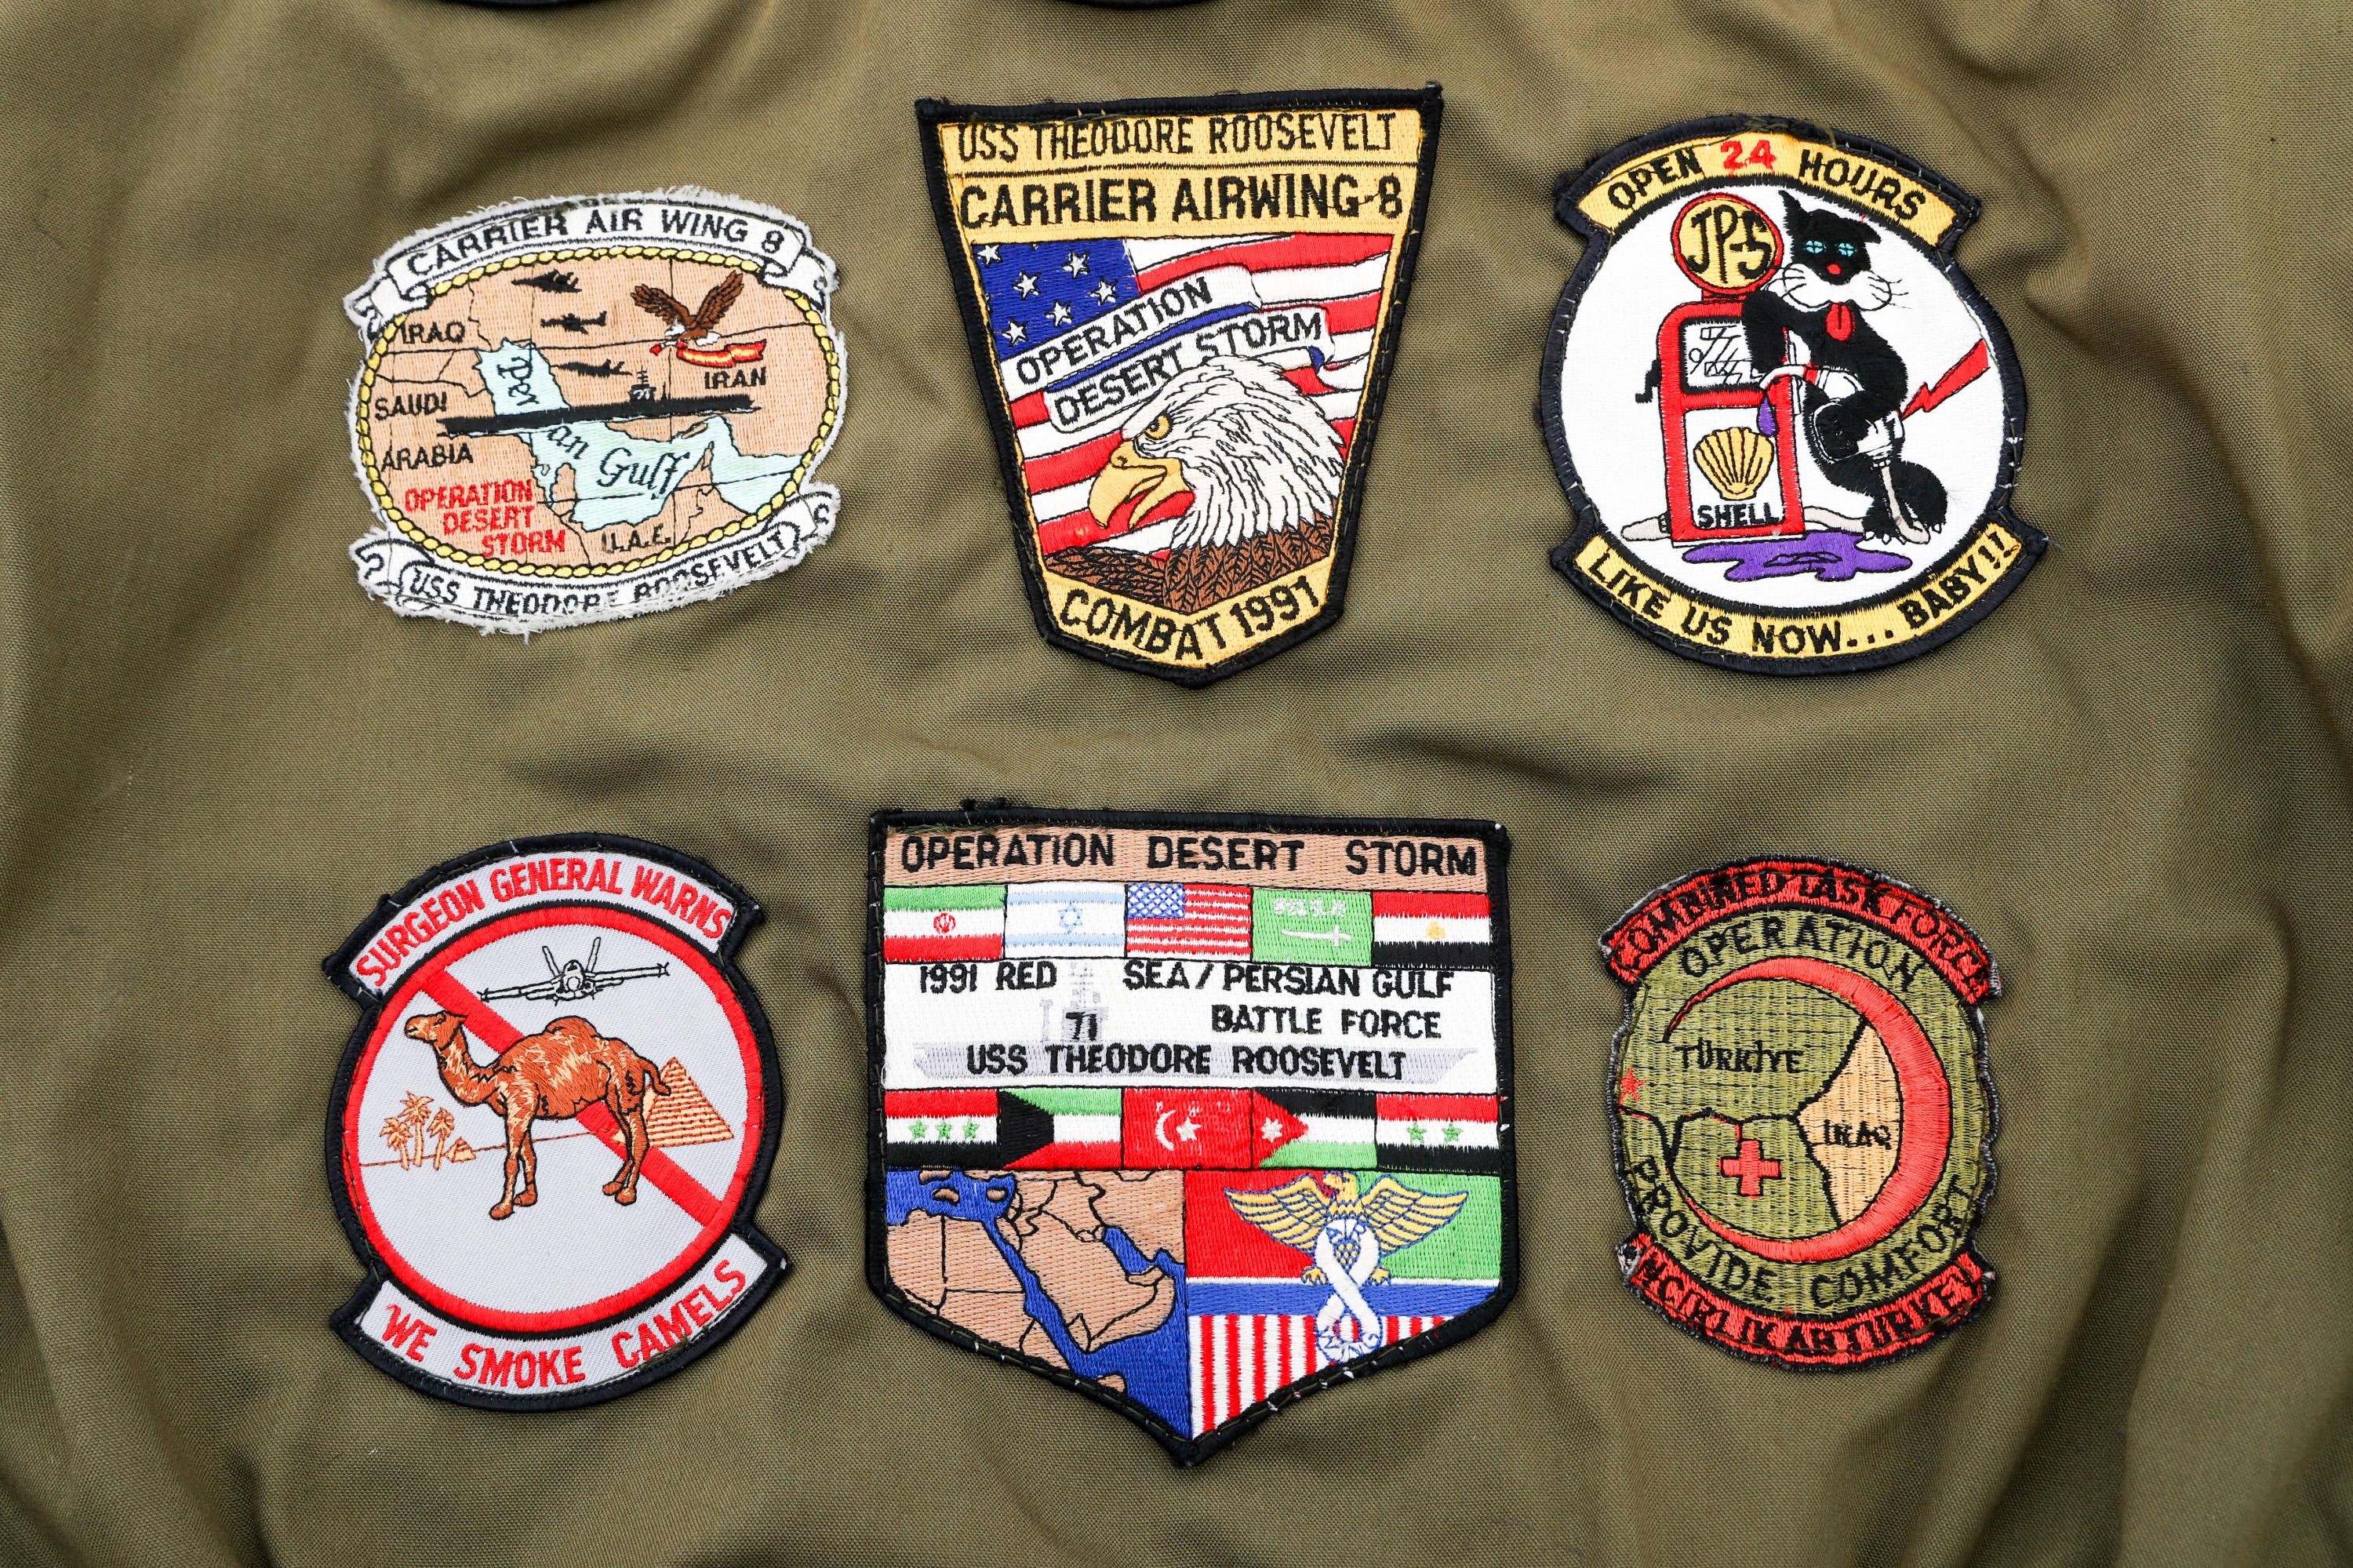 GULF WARS US ARMED FORCES TOUR JACKETS